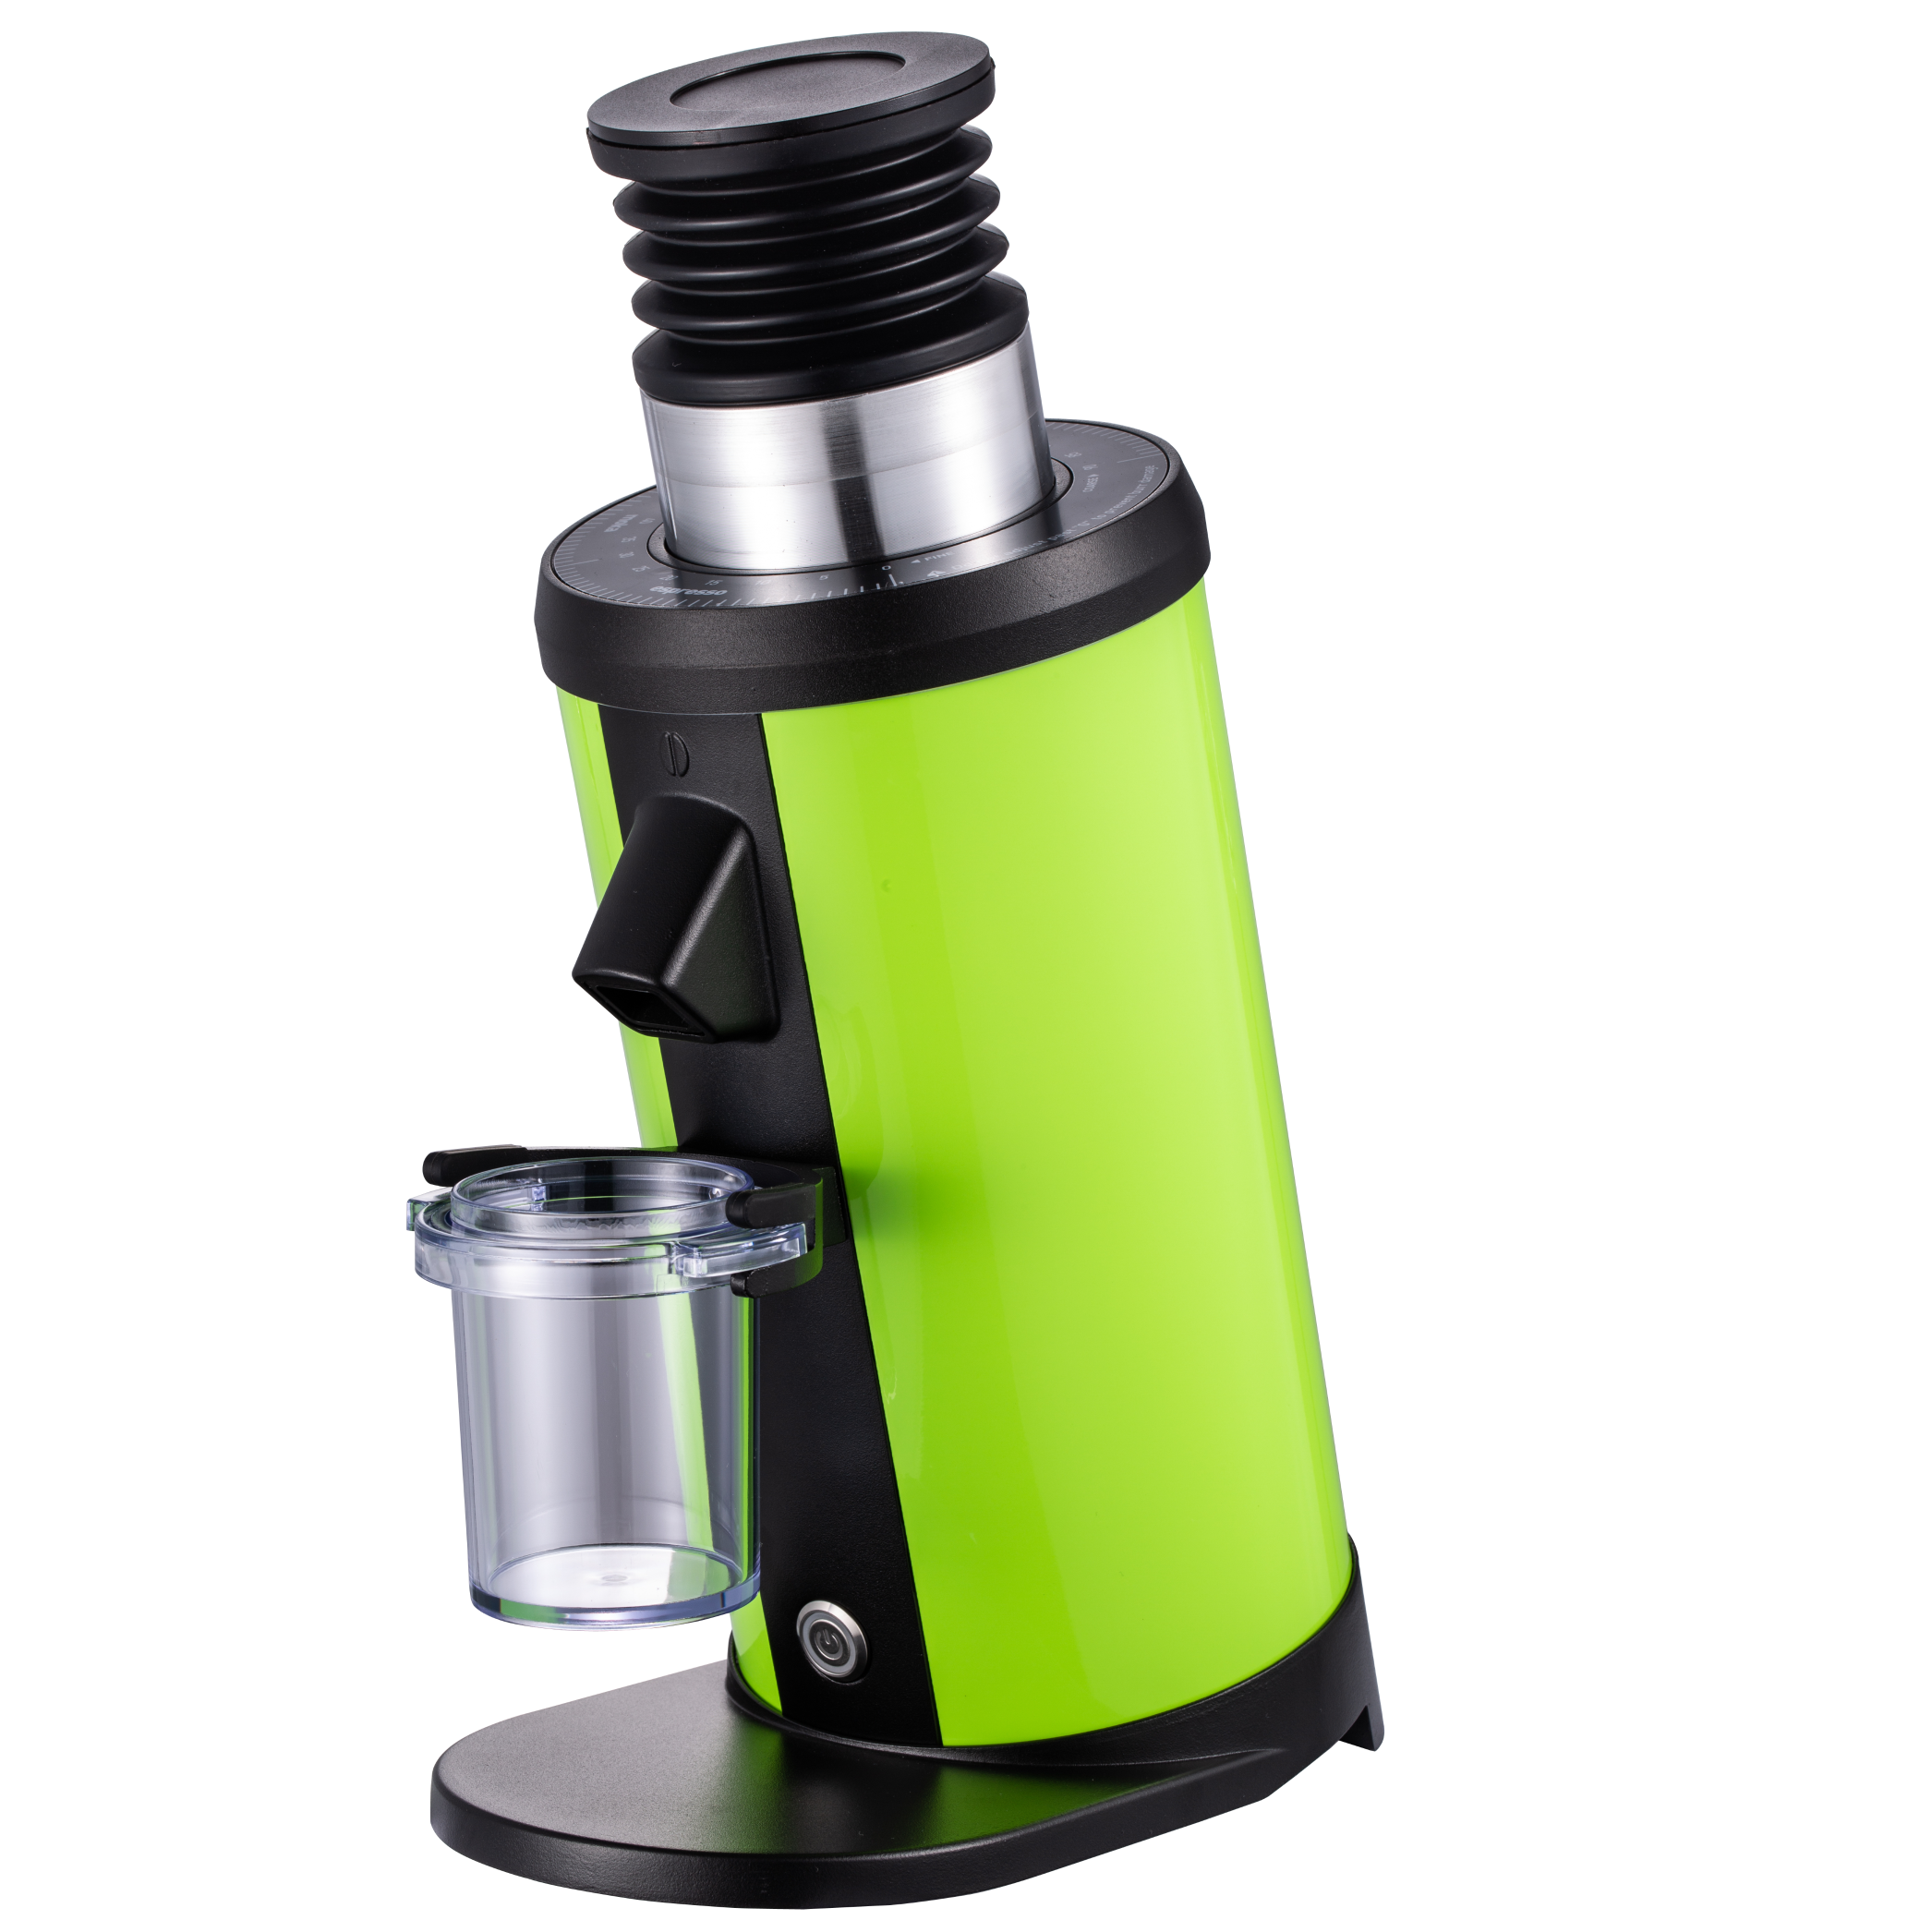 DF64 single dose grinder in lime green